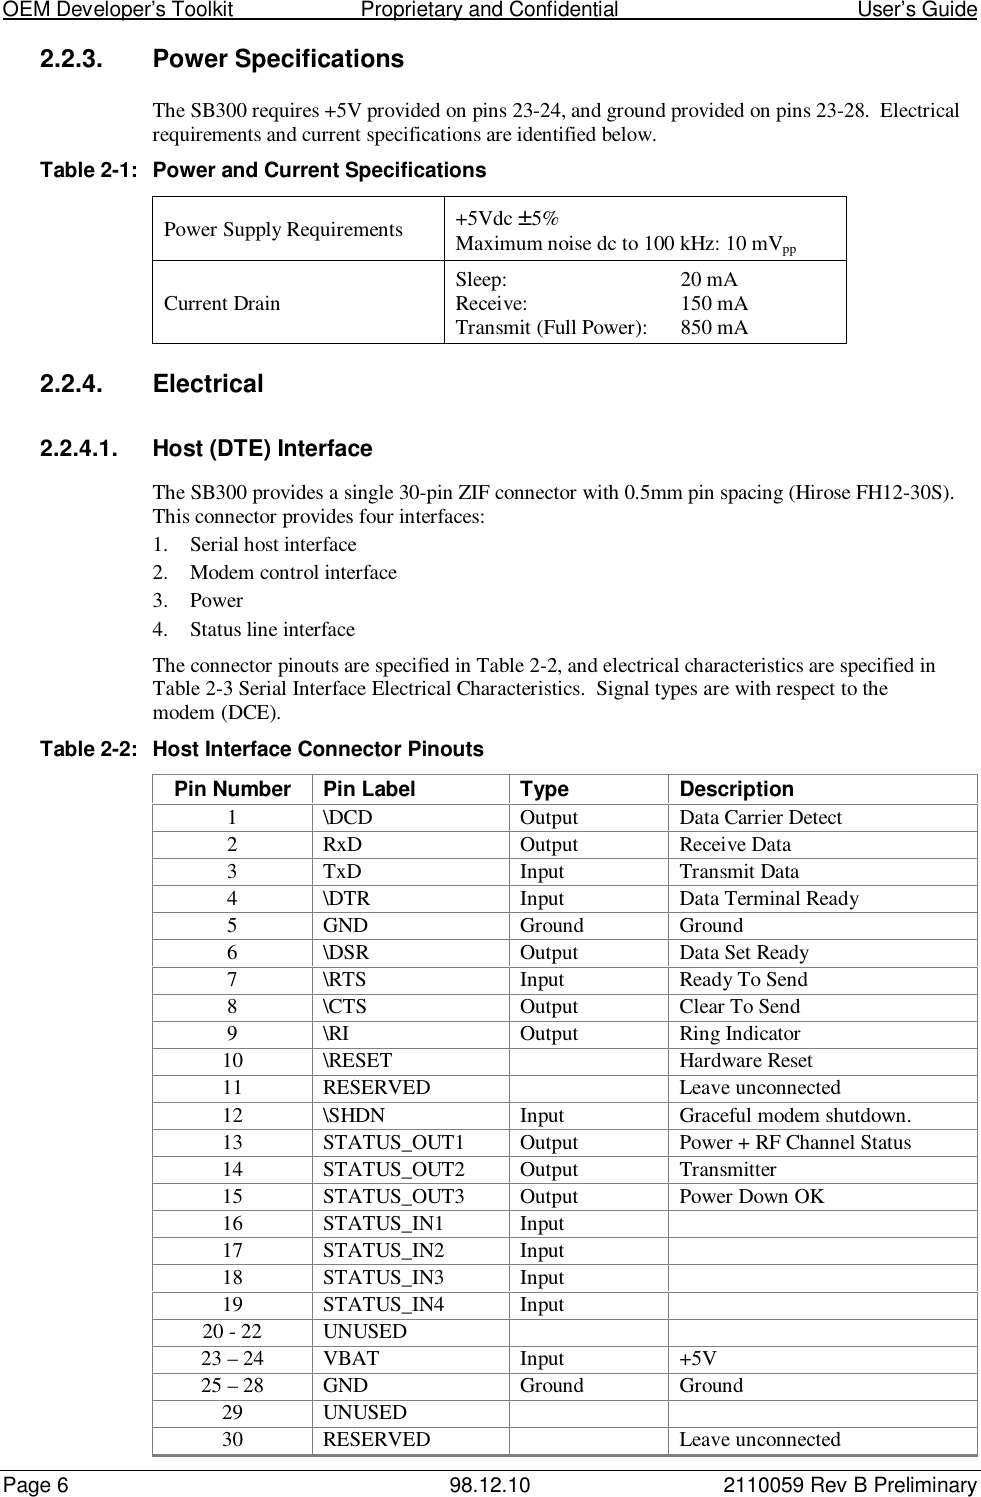 OEM Developer’s Toolkit                        Proprietary and Confidential                                        User’s GuidePage 6 98.12.10 2110059 Rev B Preliminary2.2.3.  Power SpecificationsThe SB300 requires +5V provided on pins 23-24, and ground provided on pins 23-28.  Electricalrequirements and current specifications are identified below.Table 2-1: Power and Current SpecificationsPower Supply Requirements +5Vdc ±5%Maximum noise dc to 100 kHz: 10 mVppCurrent Drain Sleep: 20 mAReceive: 150 mATransmit (Full Power): 850 mA2.2.4. Electrical2.2.4.1.  Host (DTE) InterfaceThe SB300 provides a single 30-pin ZIF connector with 0.5mm pin spacing (Hirose FH12-30S).This connector provides four interfaces:1. Serial host interface2. Modem control interface3. Power4. Status line interfaceThe connector pinouts are specified in Table 2-2, and electrical characteristics are specified inTable 2-3 Serial Interface Electrical Characteristics.  Signal types are with respect to themodem (DCE).Table 2-2: Host Interface Connector PinoutsPin Number Pin Label Type Description1 \DCD Output Data Carrier Detect2 RxD Output Receive Data3 TxD Input Transmit Data4 \DTR Input Data Terminal Ready5 GND Ground Ground6 \DSR Output Data Set Ready7 \RTS Input Ready To Send8 \CTS Output Clear To Send9 \RI Output Ring Indicator10 \RESET Hardware Reset11 RESERVED Leave unconnected12 \SHDN Input Graceful modem shutdown.13 STATUS_OUT1 Output Power + RF Channel Status14 STATUS_OUT2 Output Transmitter15 STATUS_OUT3 Output Power Down OK16 STATUS_IN1 Input17 STATUS_IN2 Input18 STATUS_IN3 Input19 STATUS_IN4 Input20 - 22 UNUSED23 – 24 VBAT Input +5V25 – 28 GND Ground Ground29 UNUSED30 RESERVED Leave unconnected